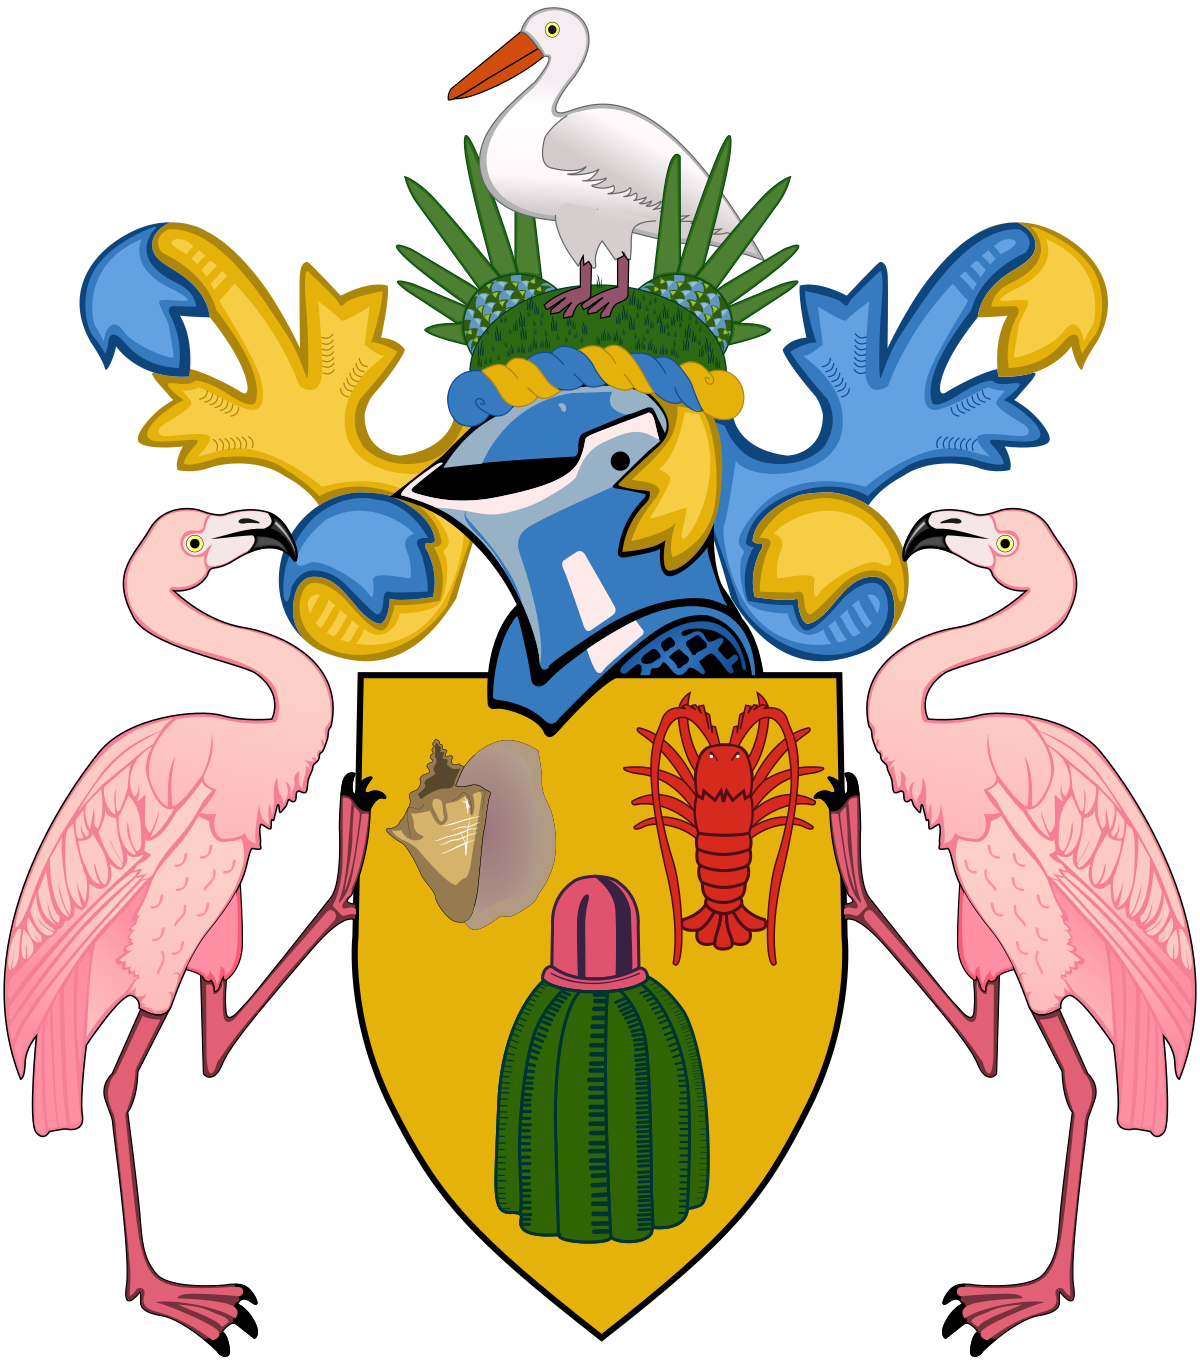 Government of Turks and Caicos Islands